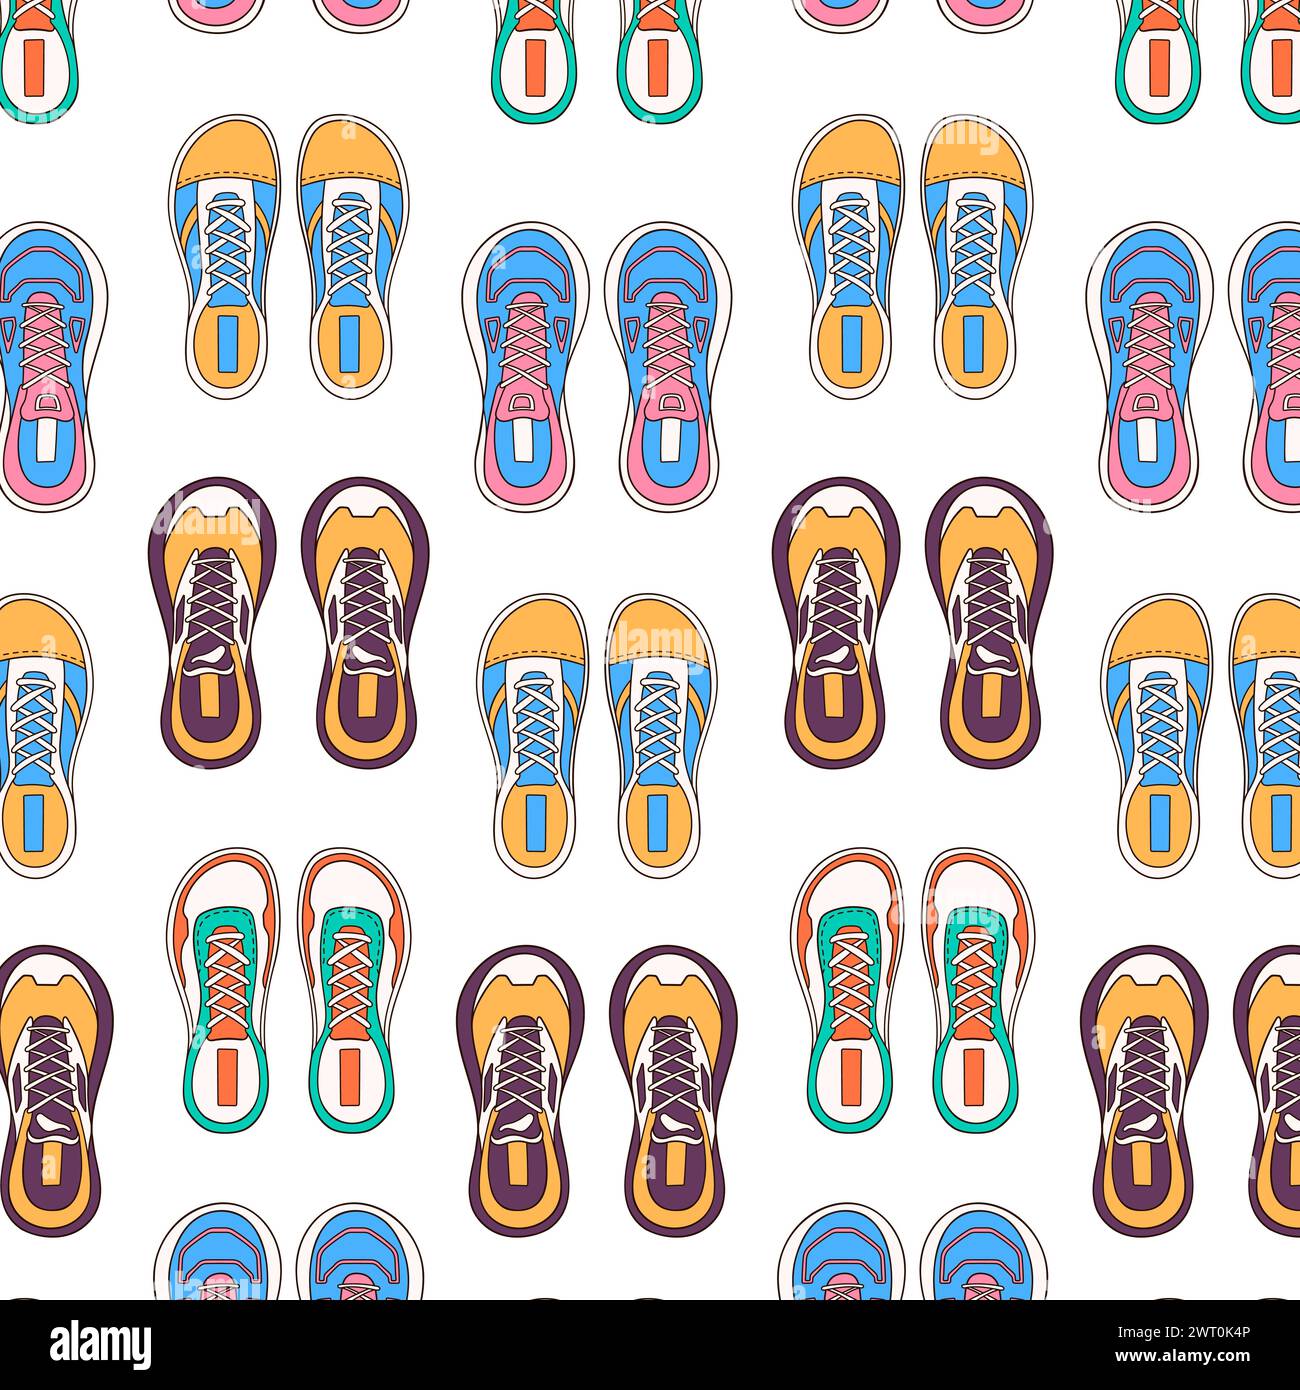 Cartoon style sneakers seamless pattern. Casual footwear, fitness training shoes. Vector illustration on a white background. Stock Vector